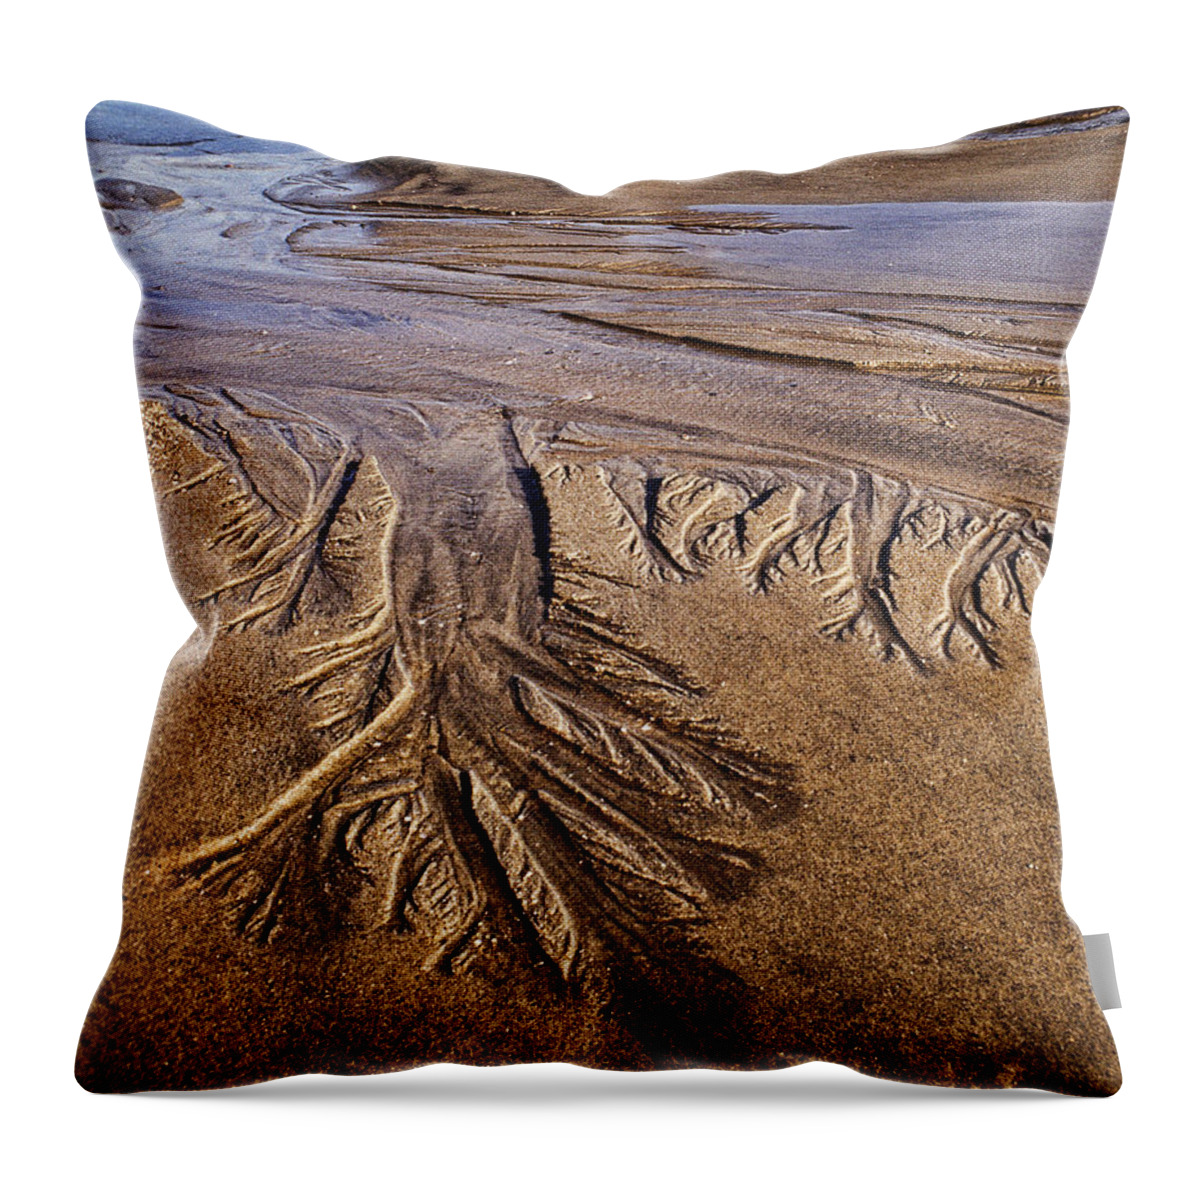 Design Throw Pillow featuring the photograph Artwork Of The Tides by Gary Slawsky